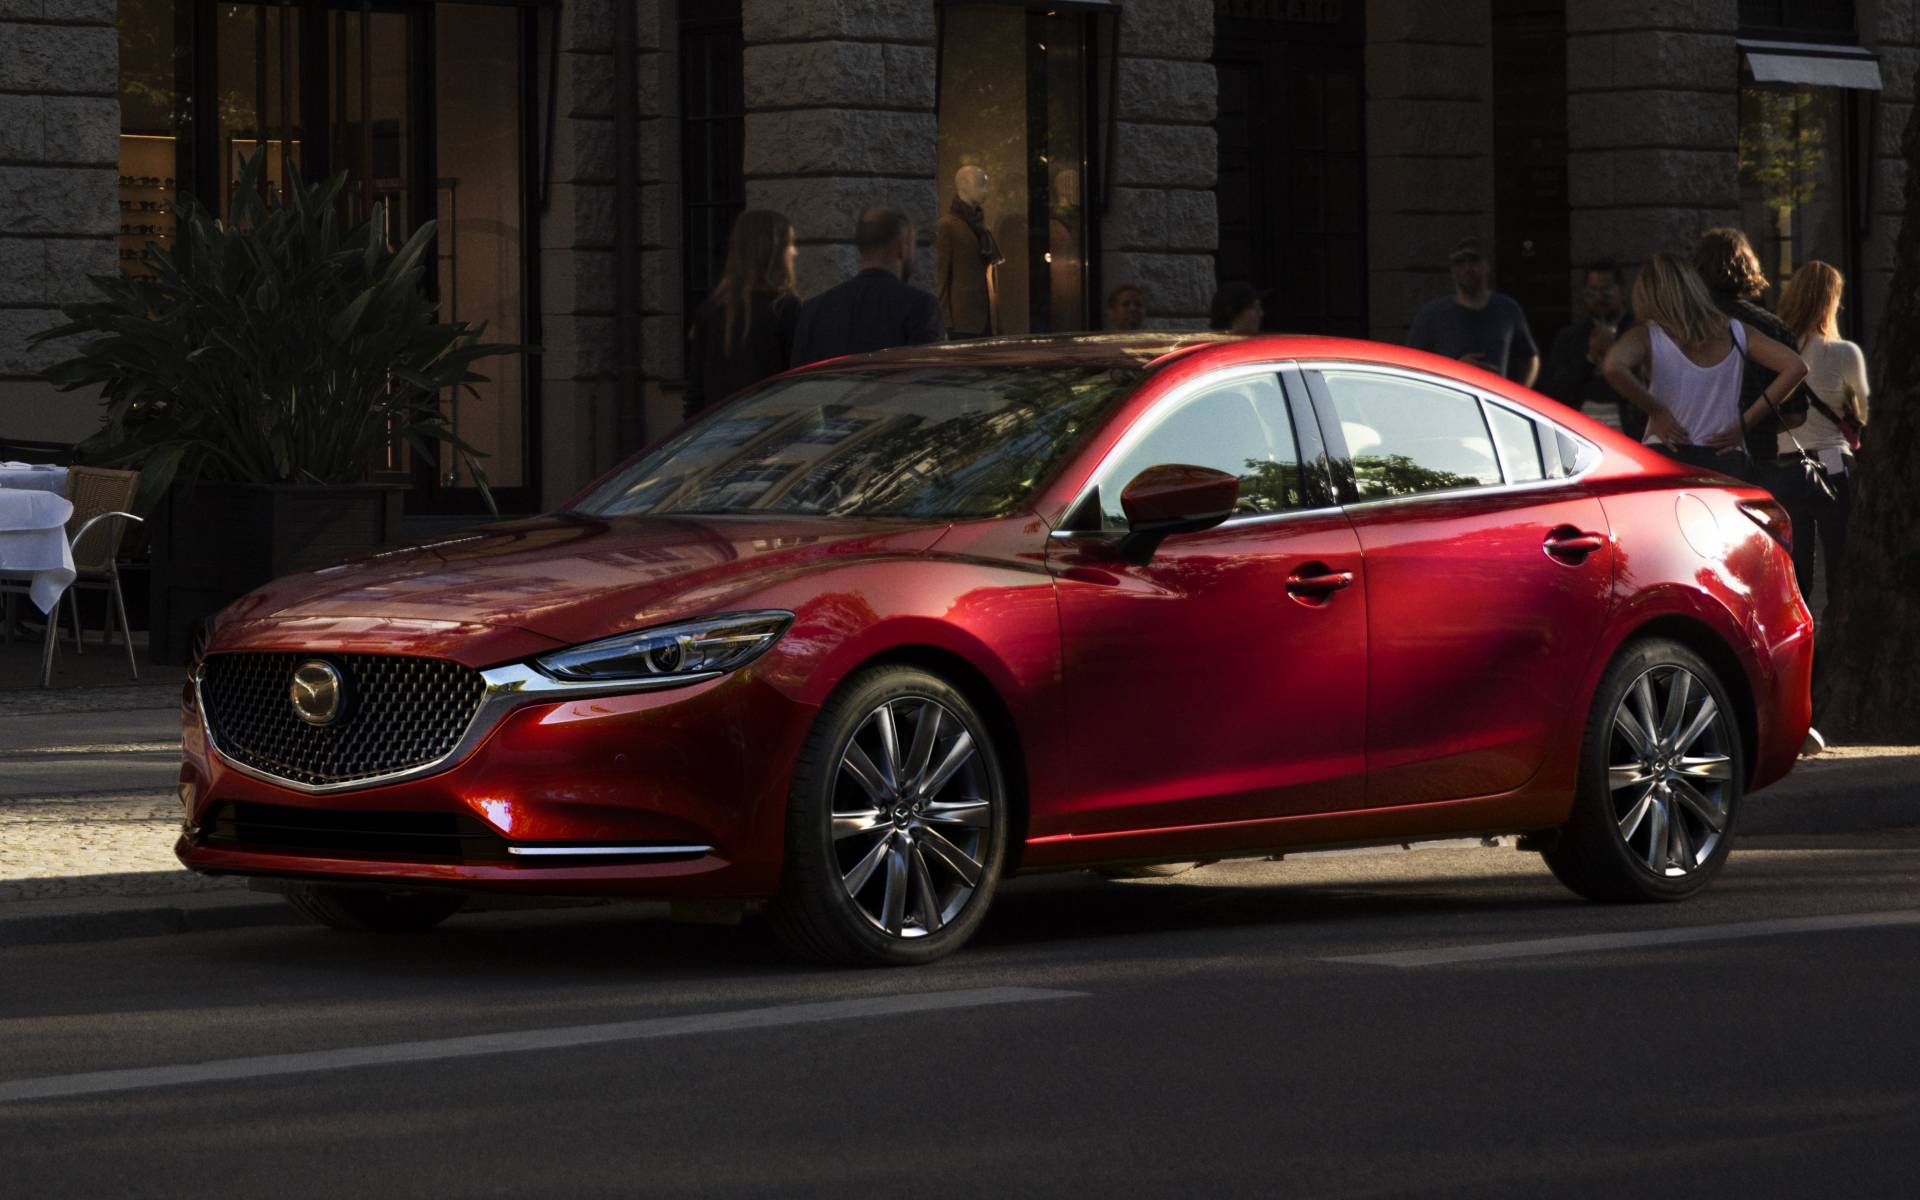 2020 Mazda Mazda6 News, reviews, picture galleries and